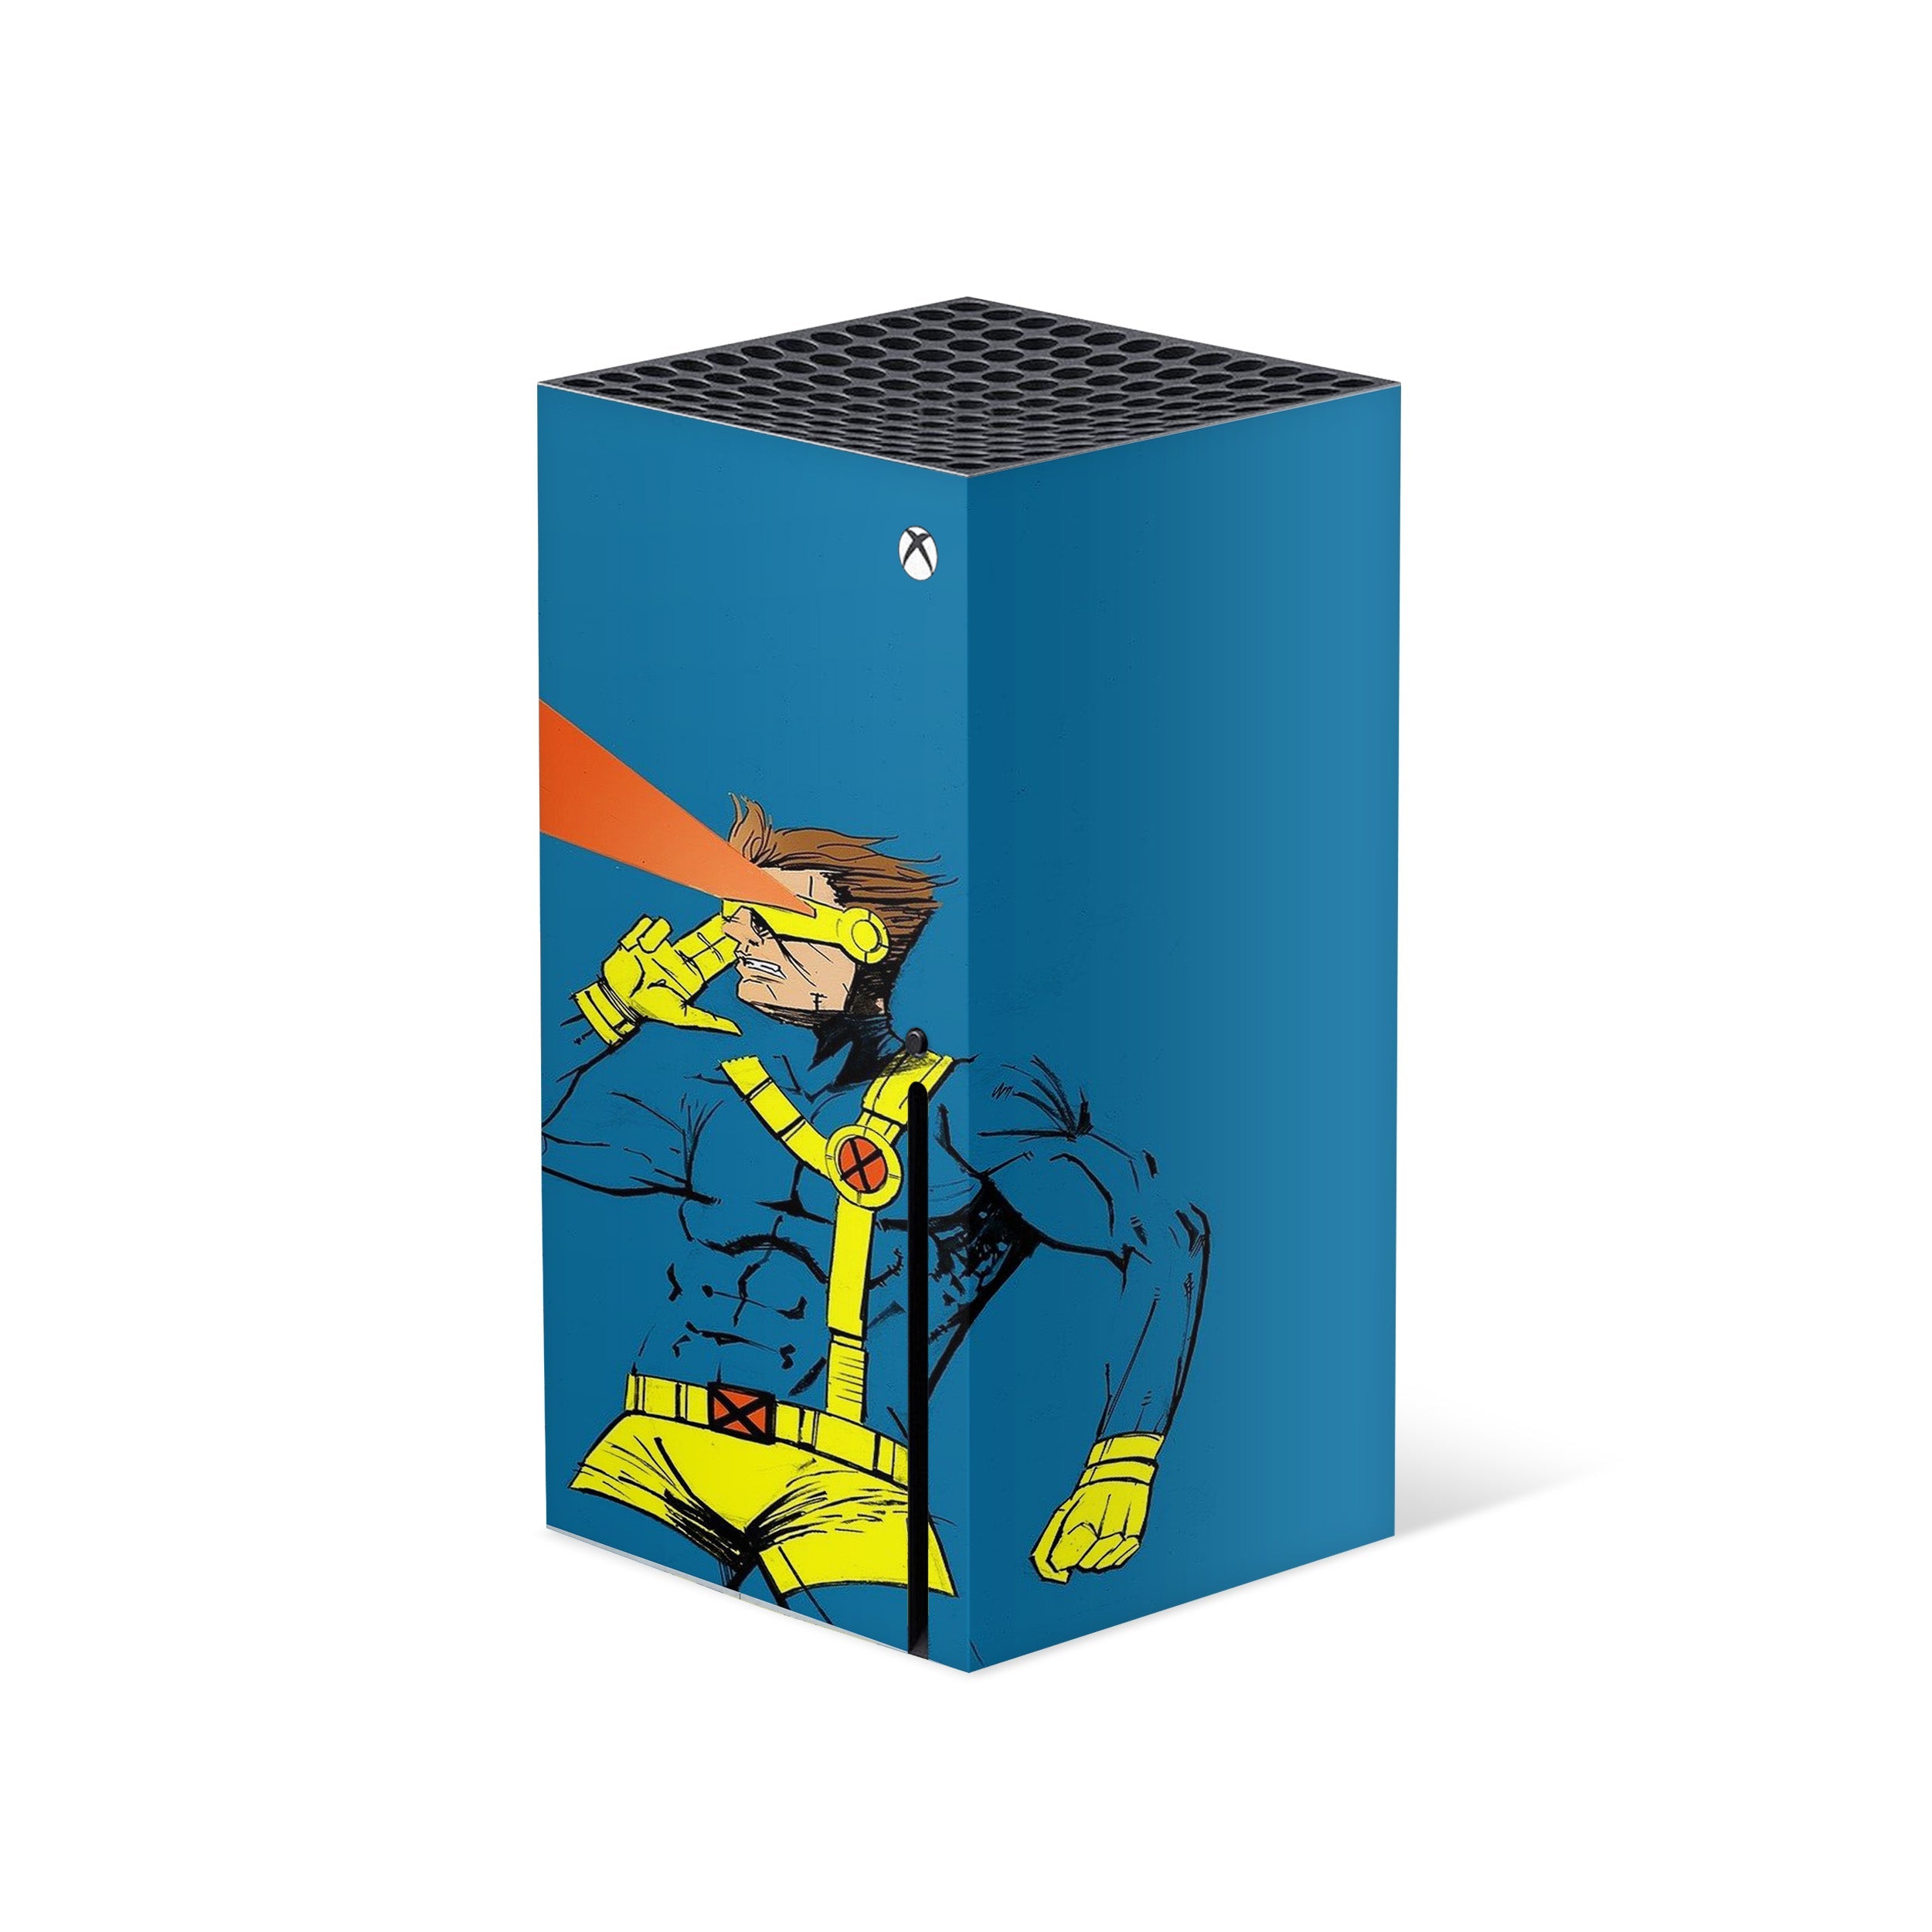 A video game skin featuring a Marvel X Men Cyclops design for the Xbox Series X.